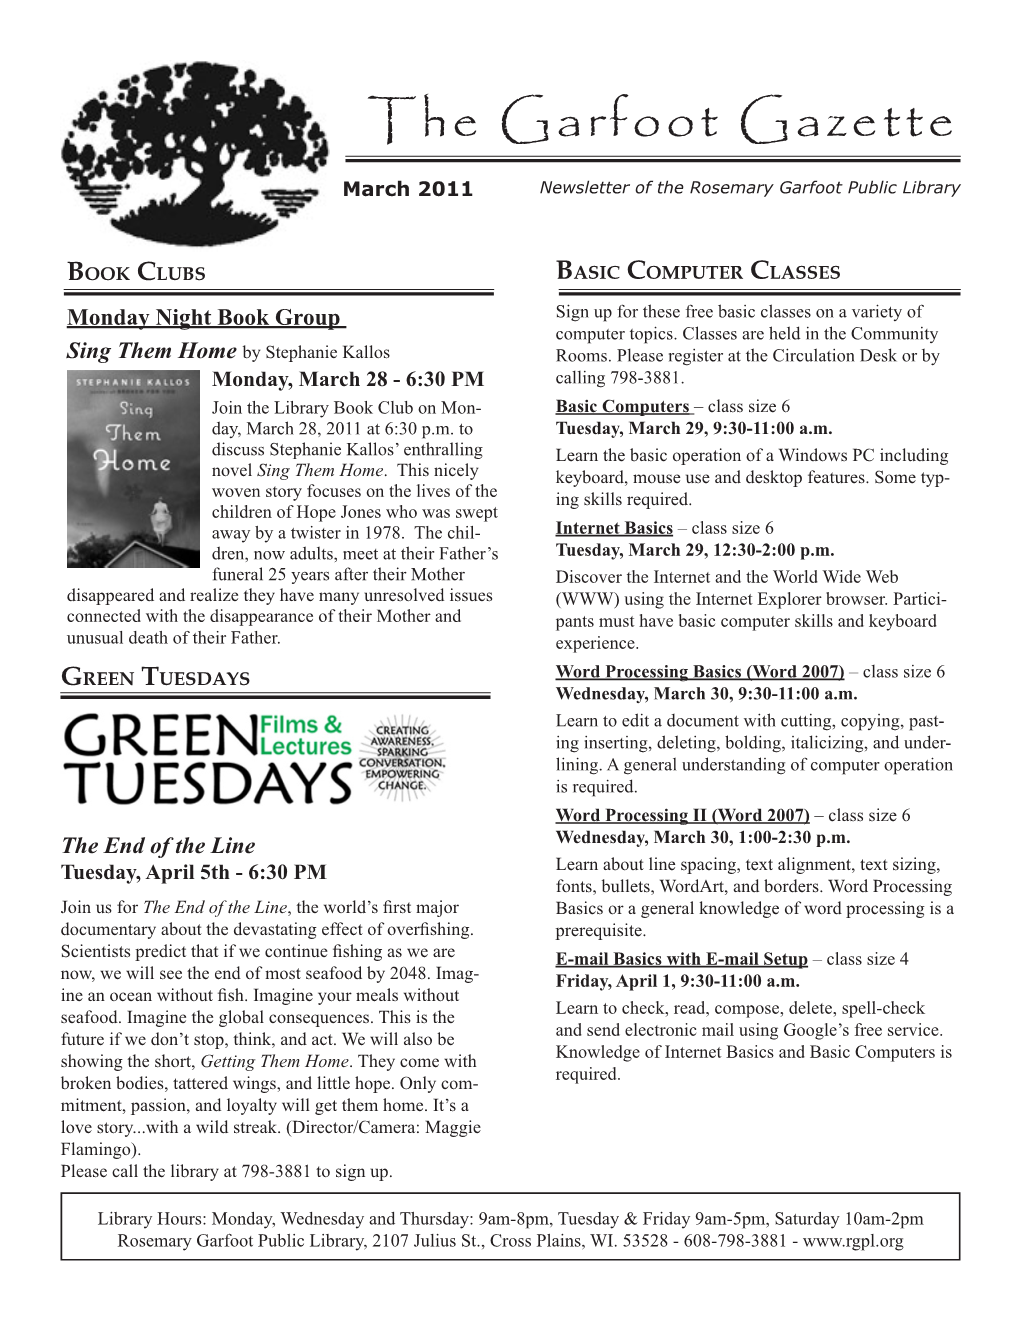 The Garfoot Gazette March 2011 Newsletter of the Rosemary Garfoot Public Library